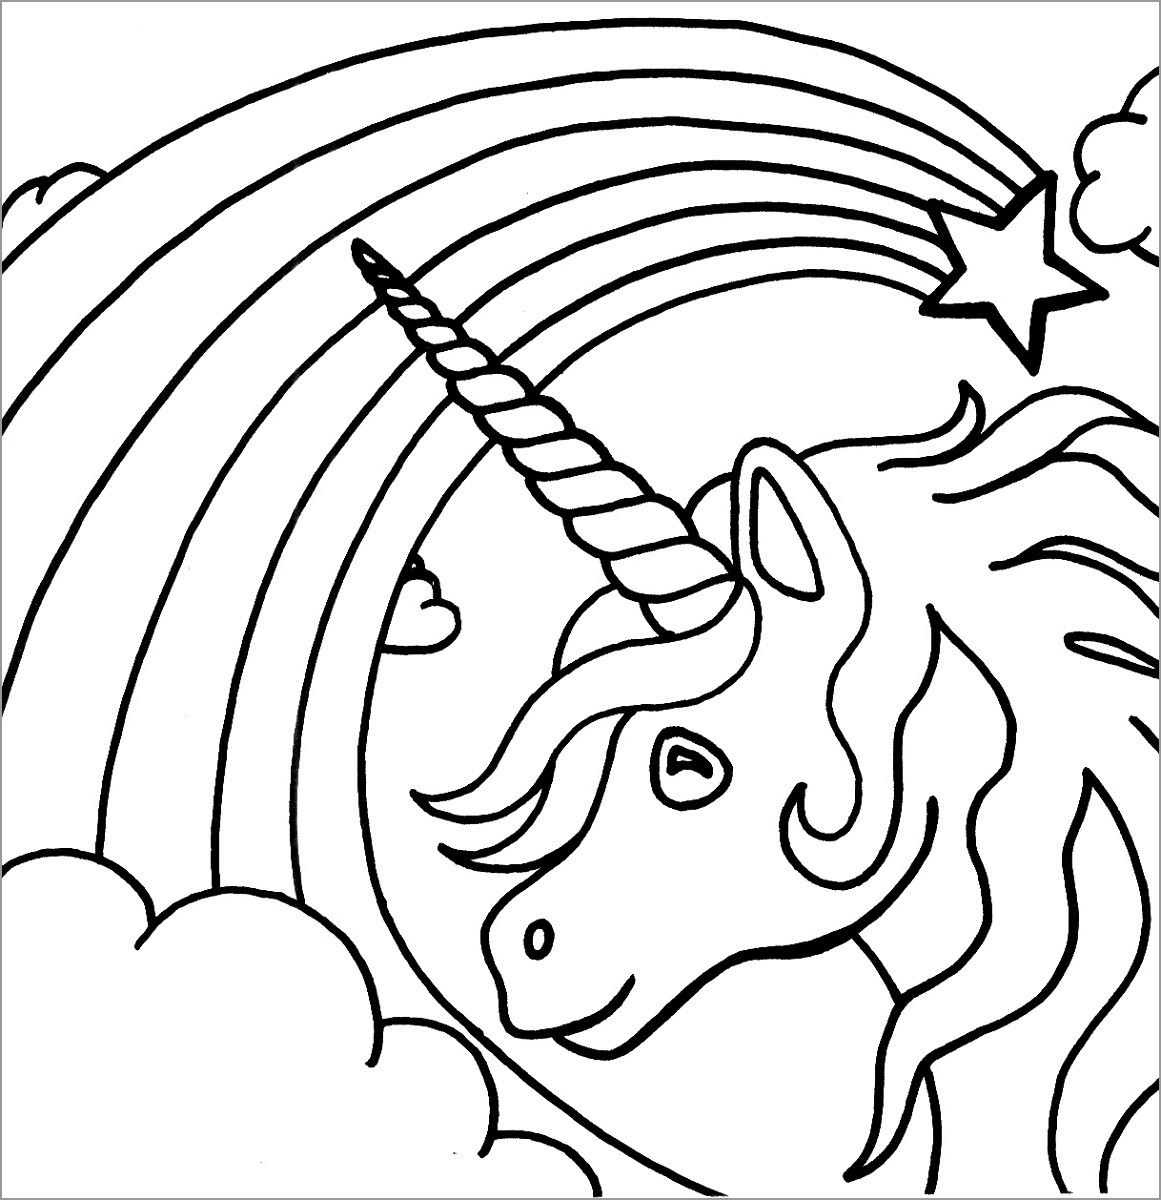 Unicorn, Star and Rainbow Coloring Page   ColoringBay